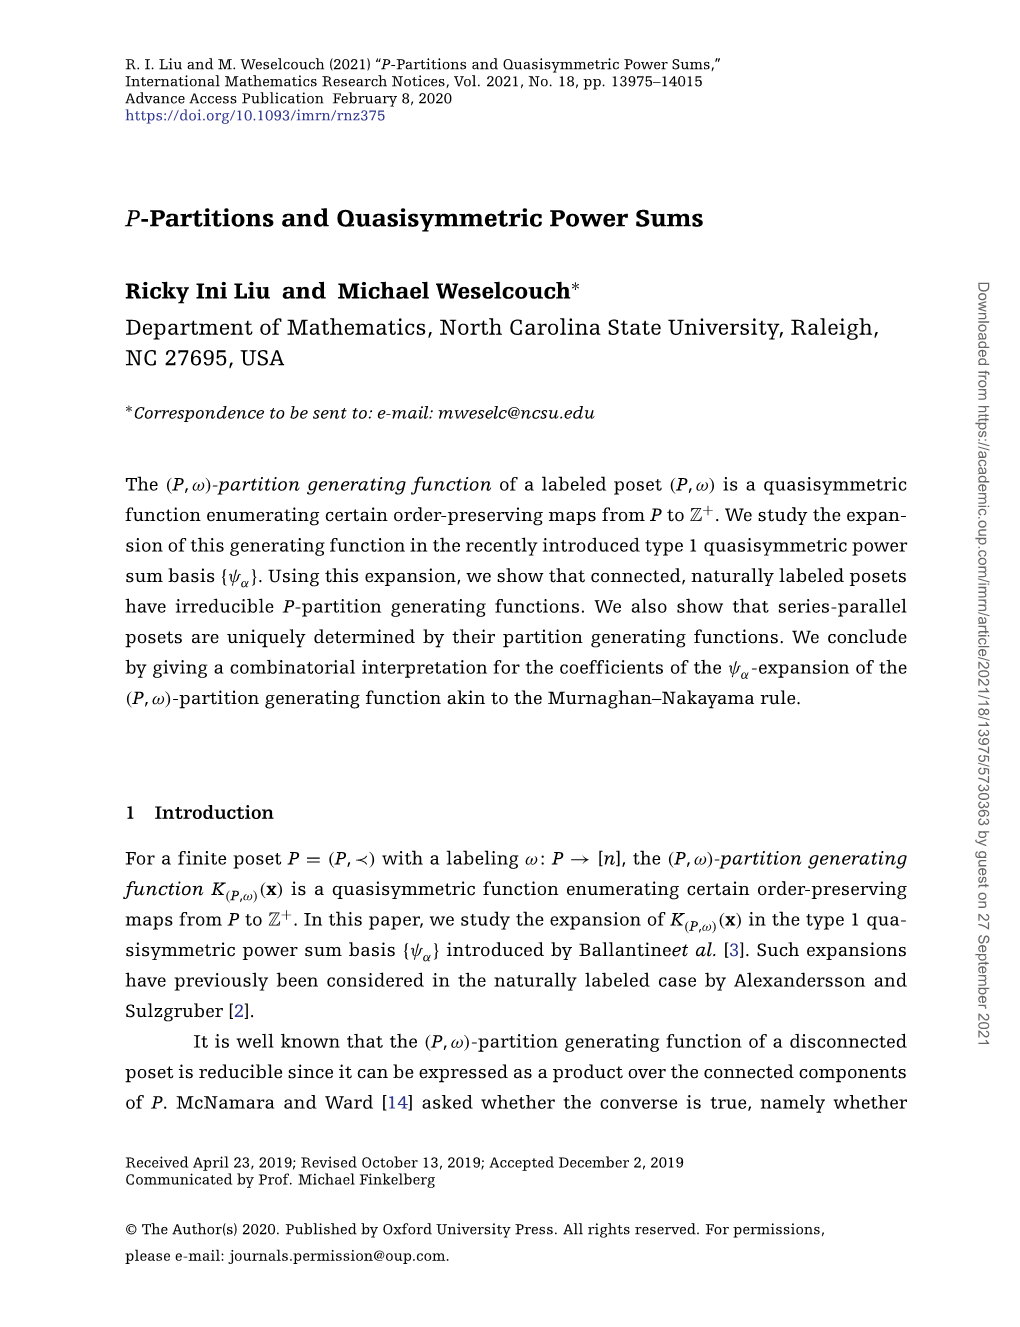 P-Partitions and Quasisymmetric Power Sums,” International Mathematics Research Notices, Vol